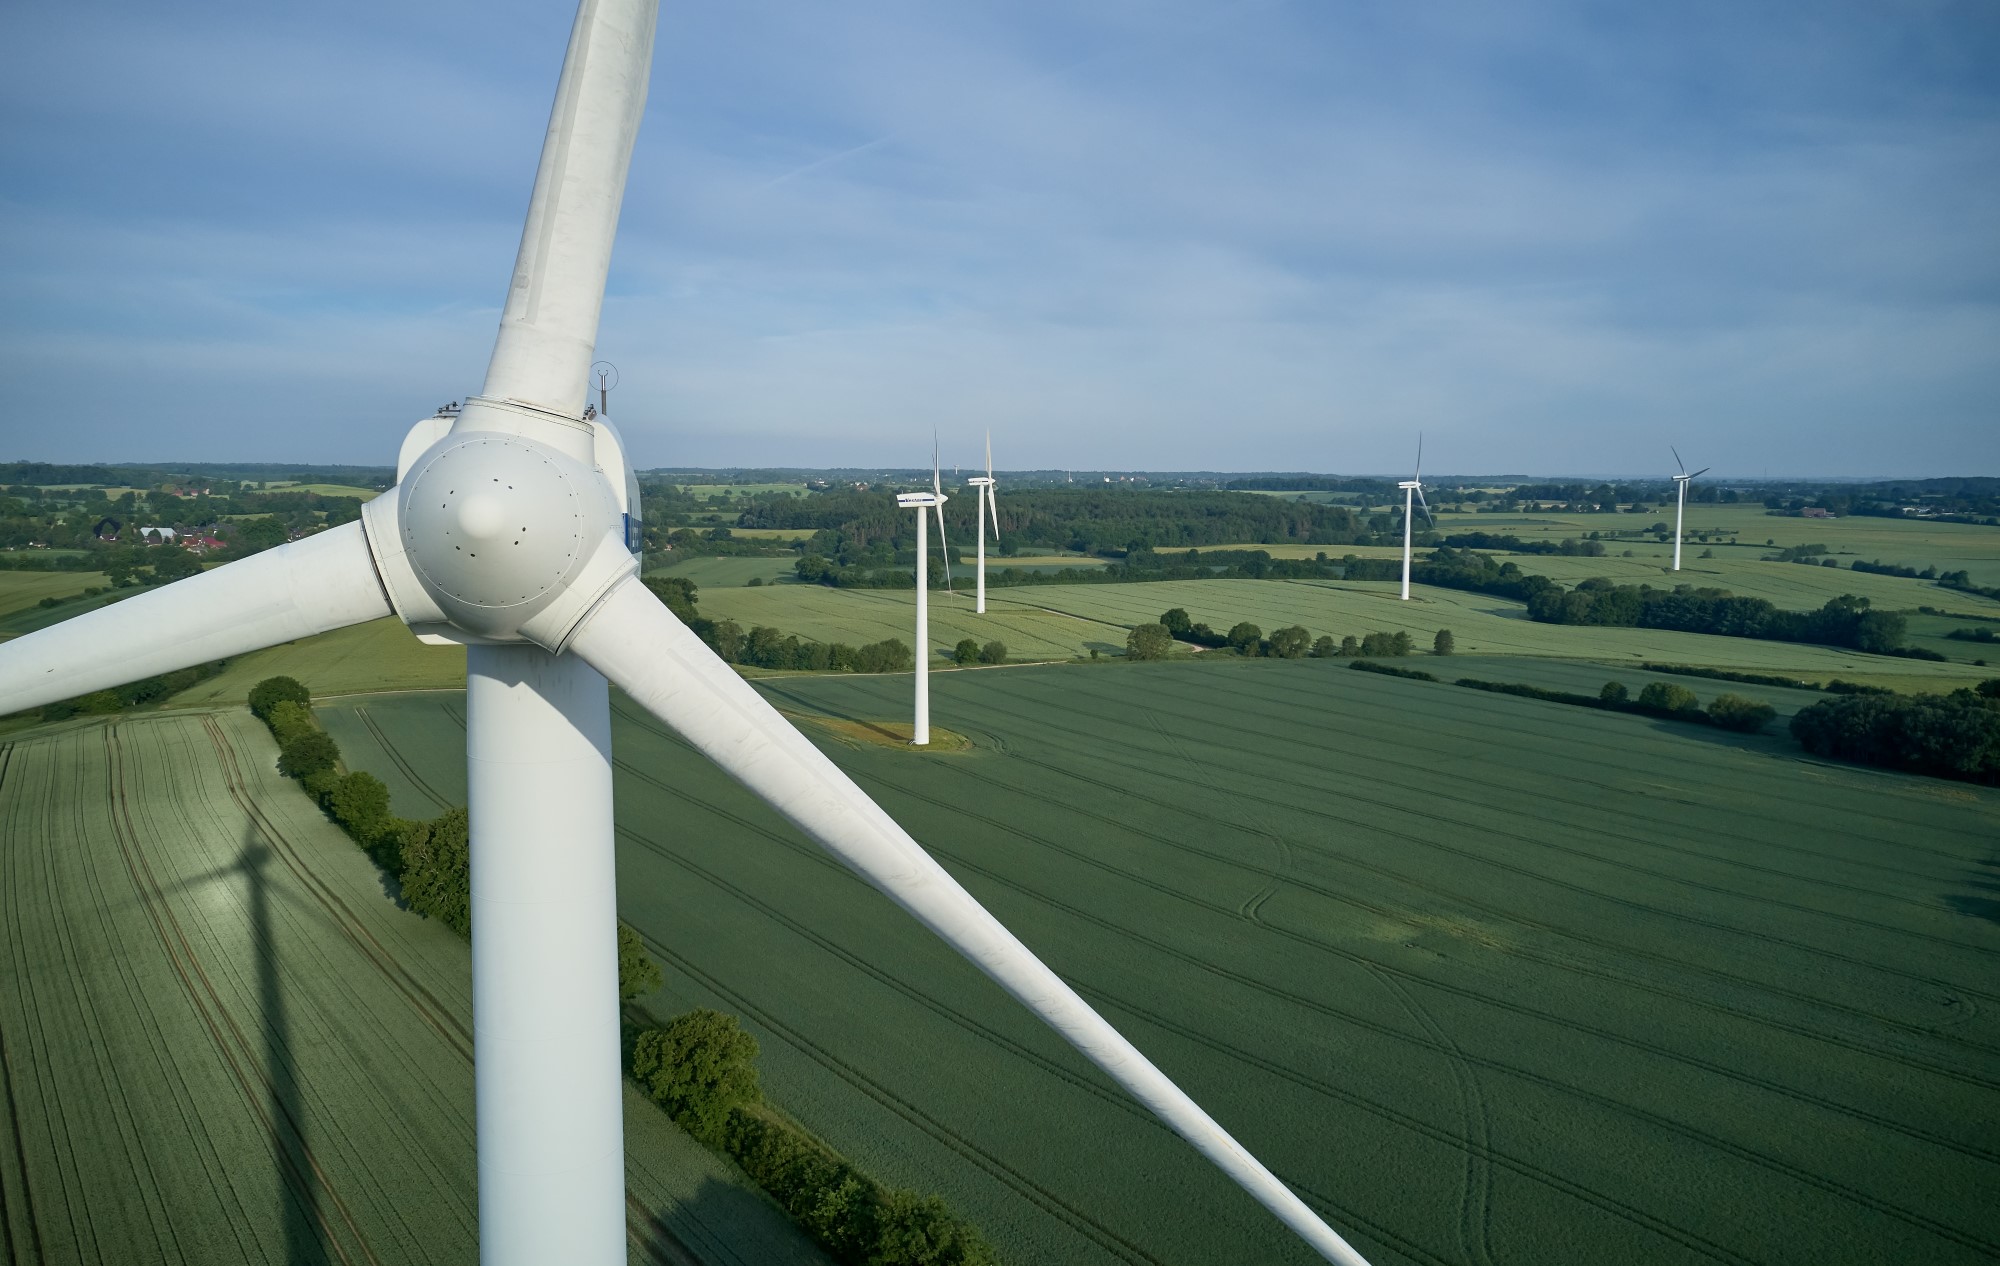 Qualitas Energy Acquires 56.7 MW Wind Project in Germany for Renewable Energy Expansion